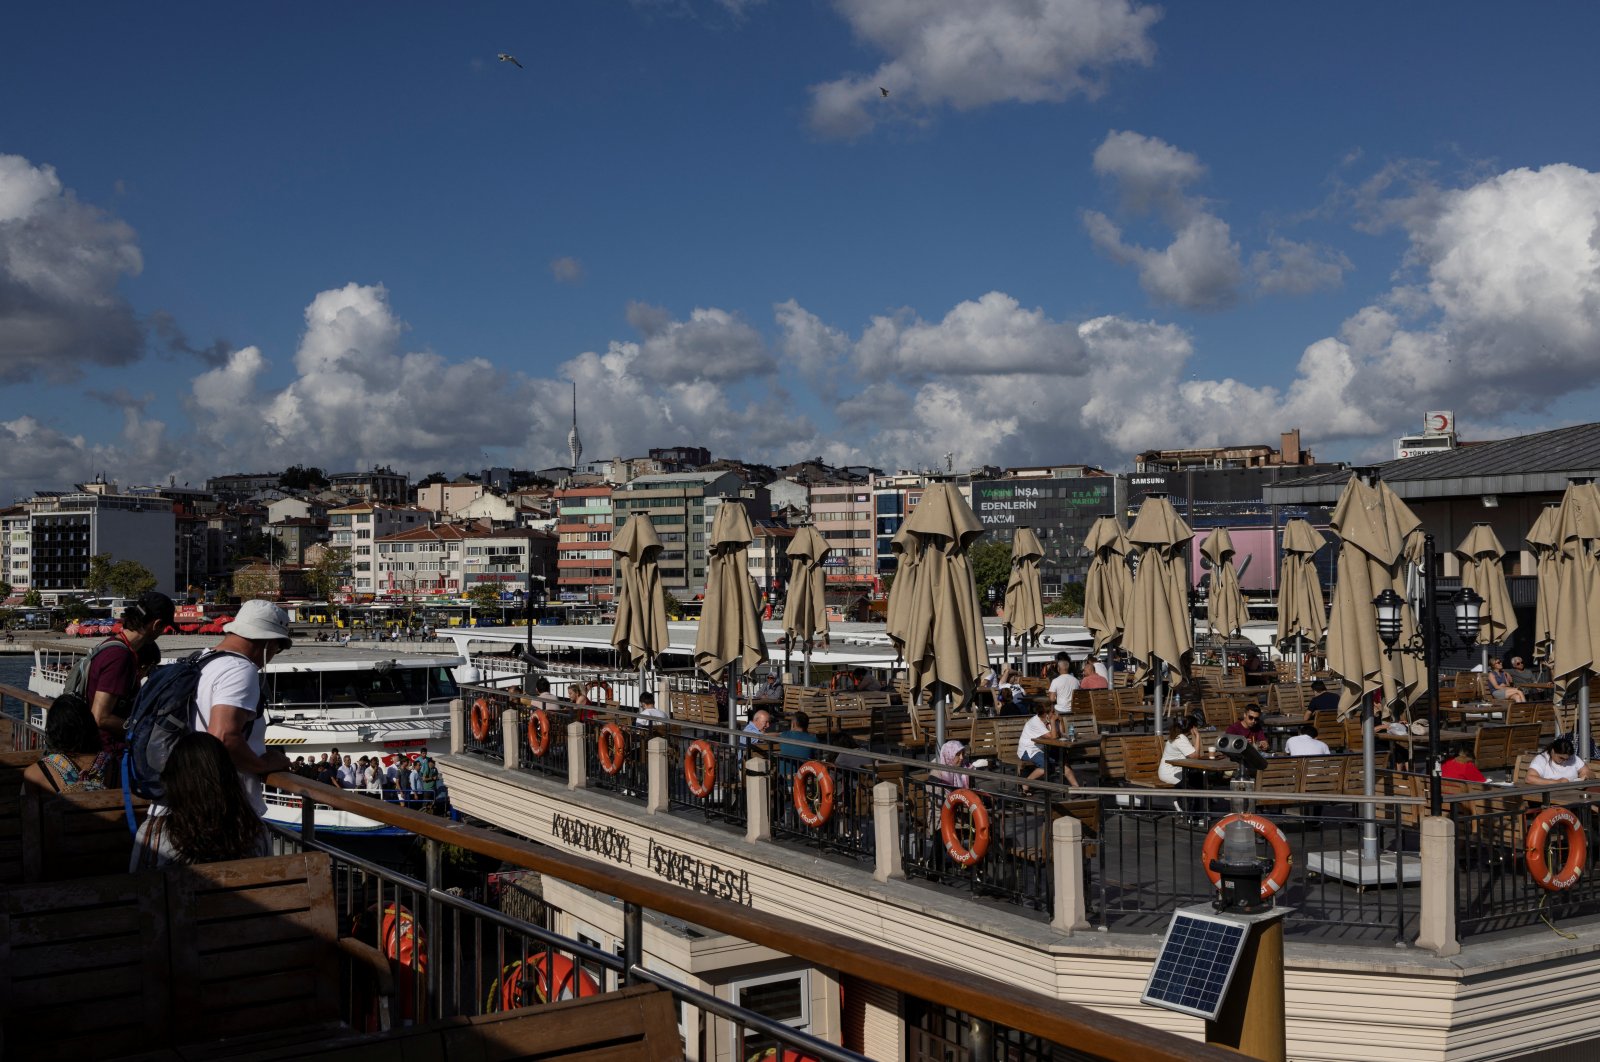 People on a ferry wait for berthing as others sit in a cafe in Istanbul, Turkey, July 20, 2022. (Reuters Photo)